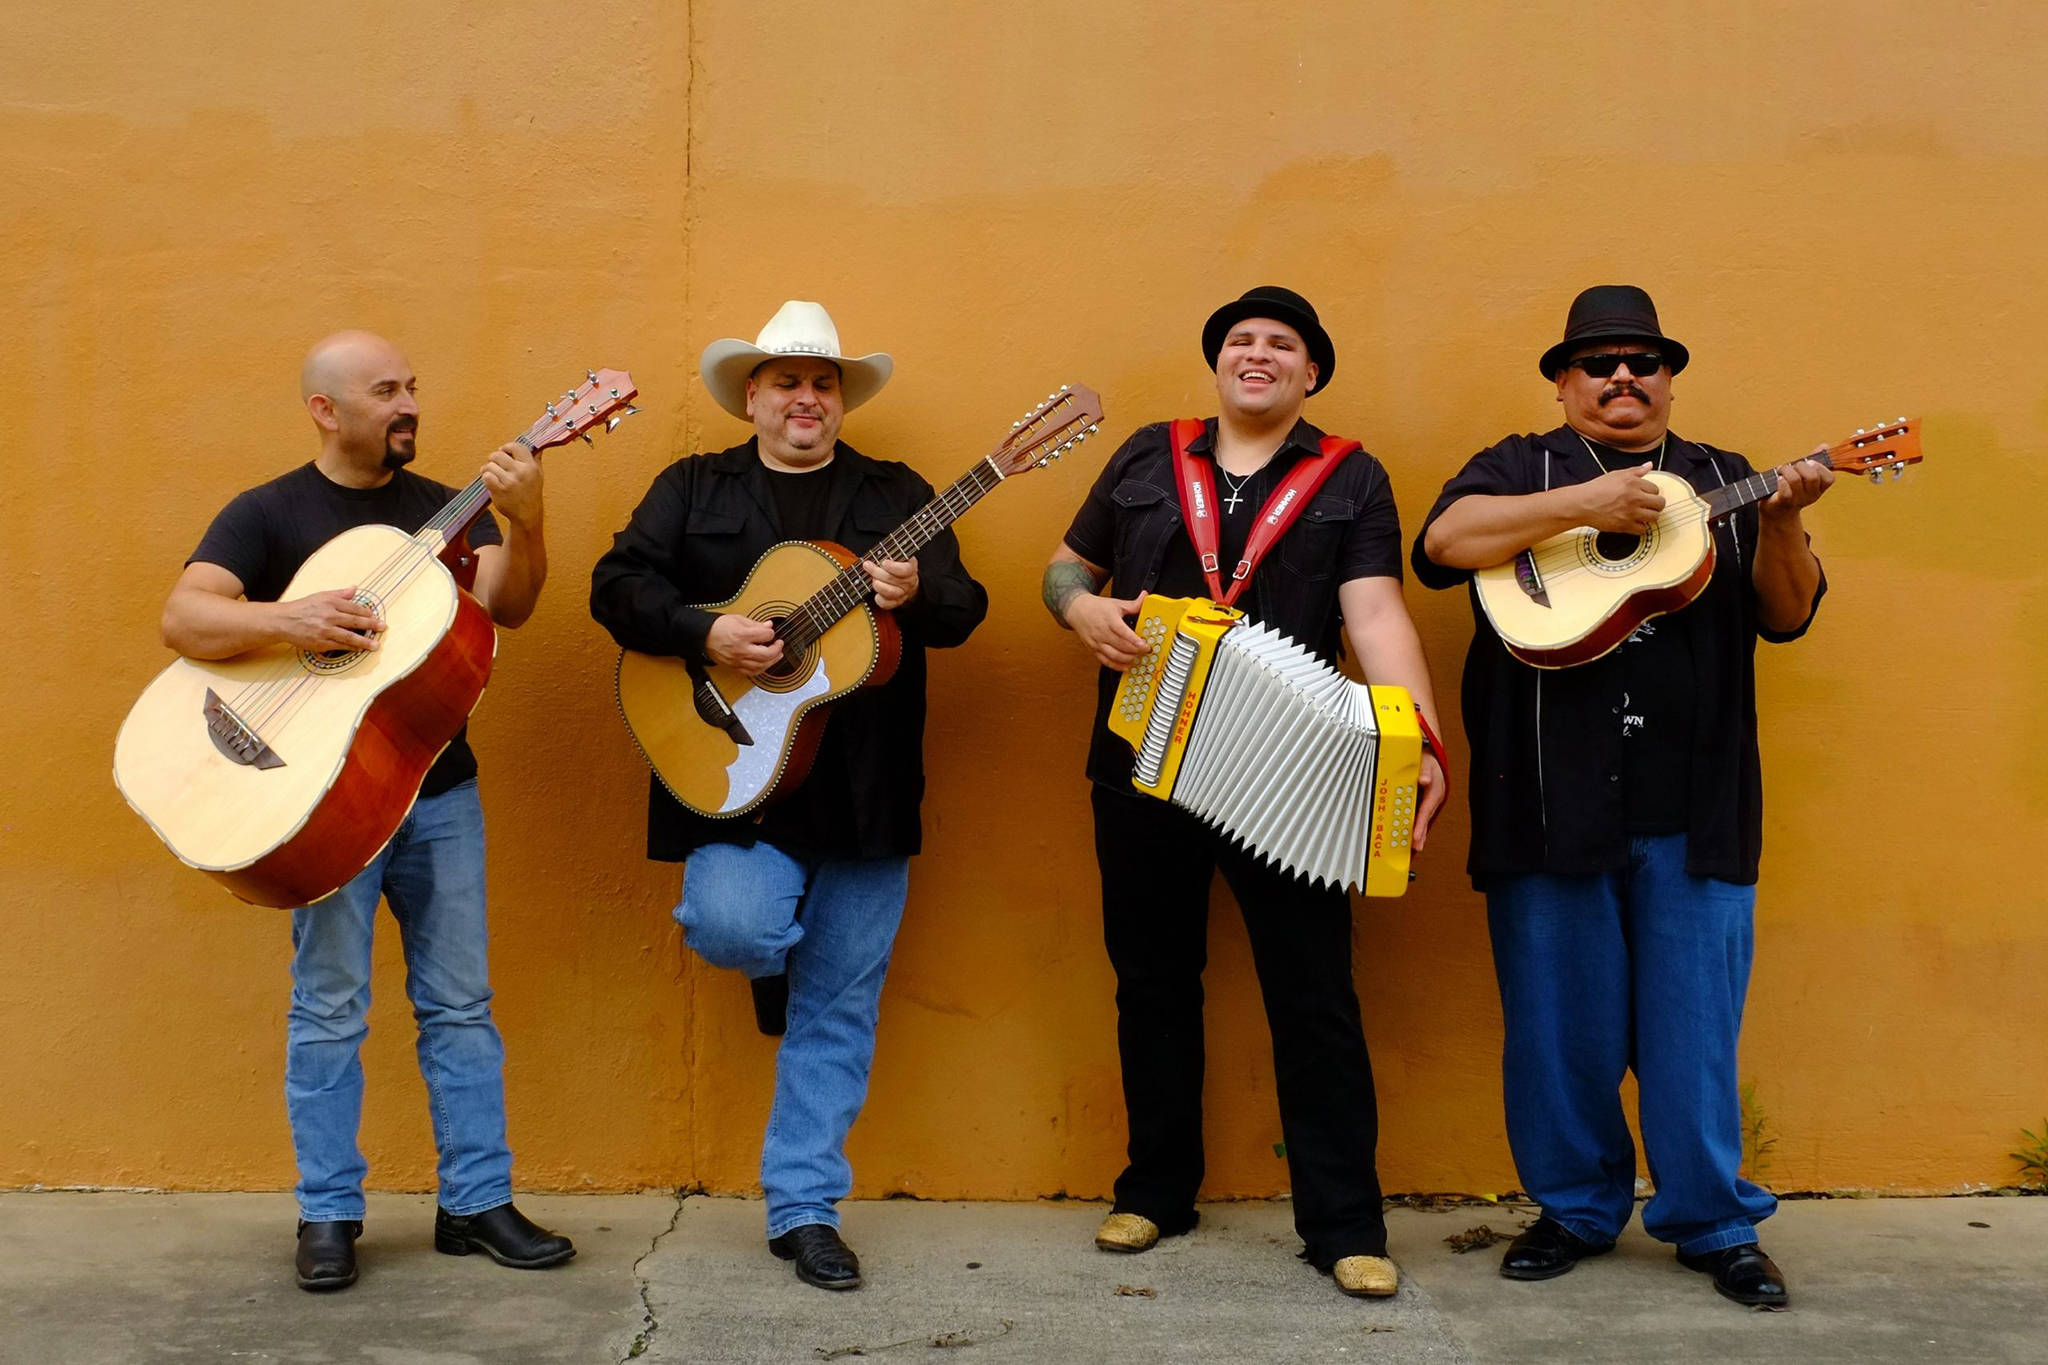 Sexto appeal: Guest artist Los Texmaniacs will bring southwestern flare, instruments to Folk Fest